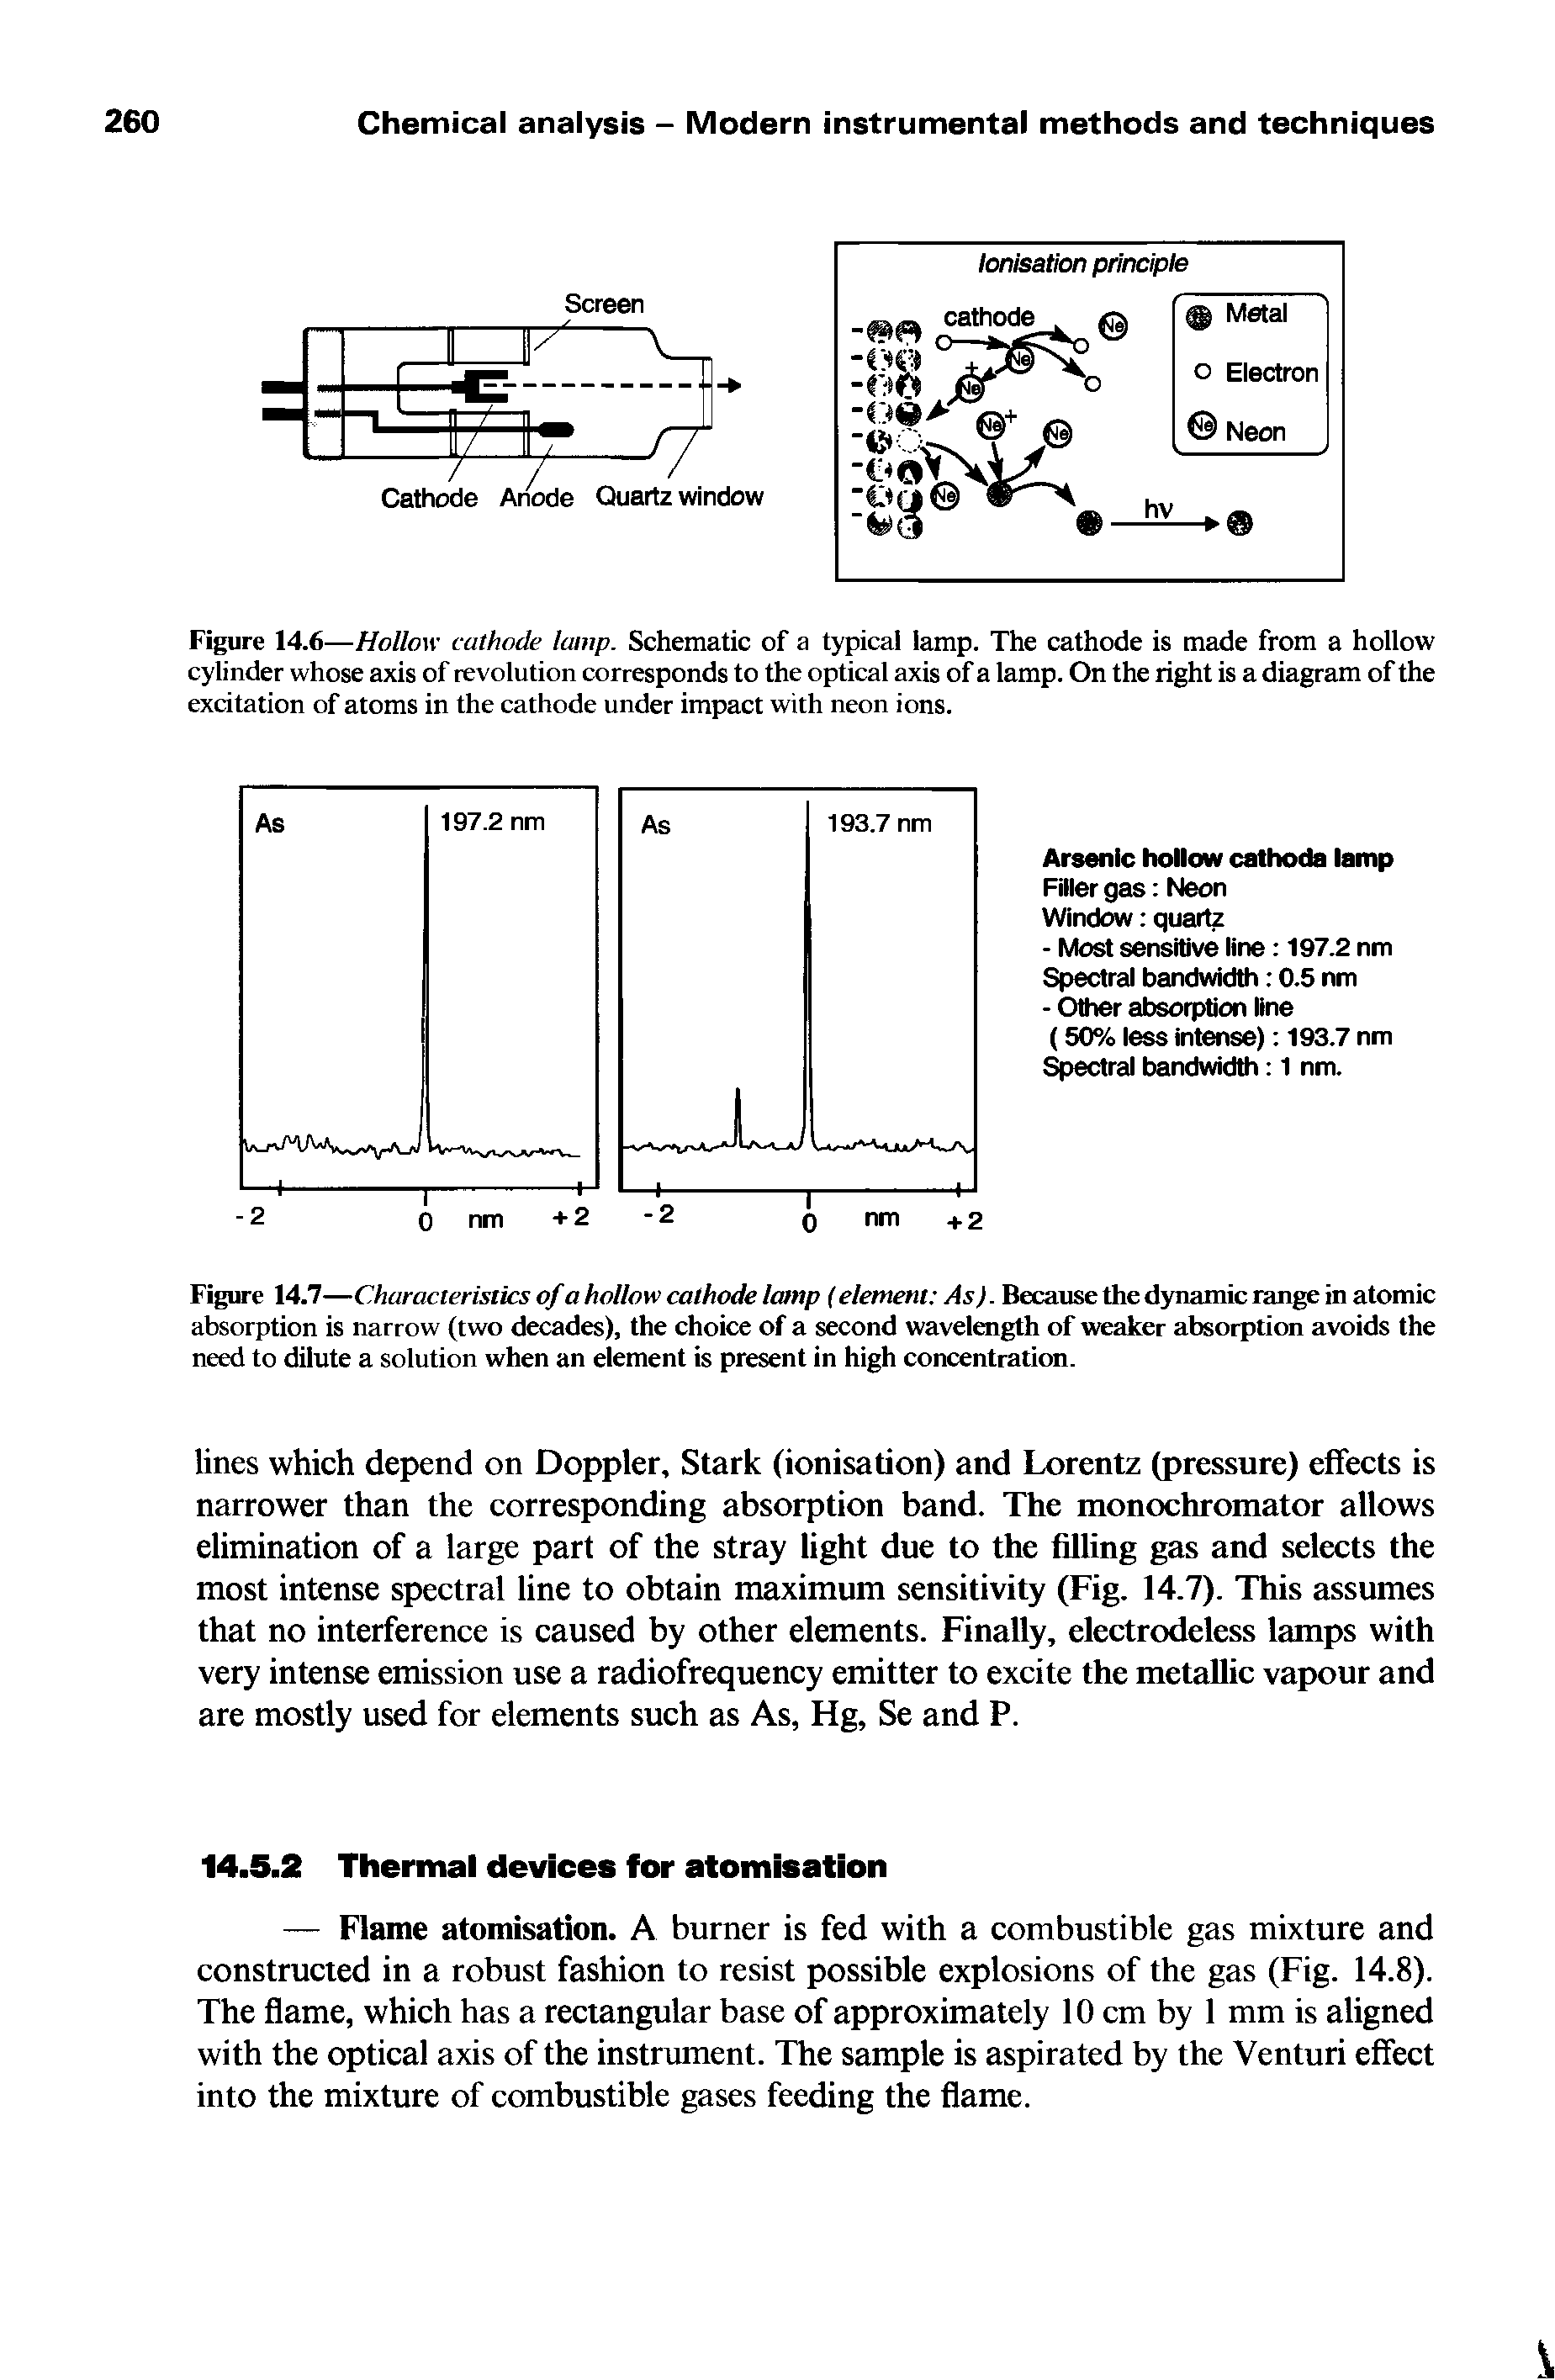 Figure 14.7—Characteristics of a hollow cathode lamp (element As). Because the dynamic range in atomic absorption is narrow (two decades), the choice of a second wavelength of weaker absorption avoids the need to dilute a solution when an element is present in high concentration.